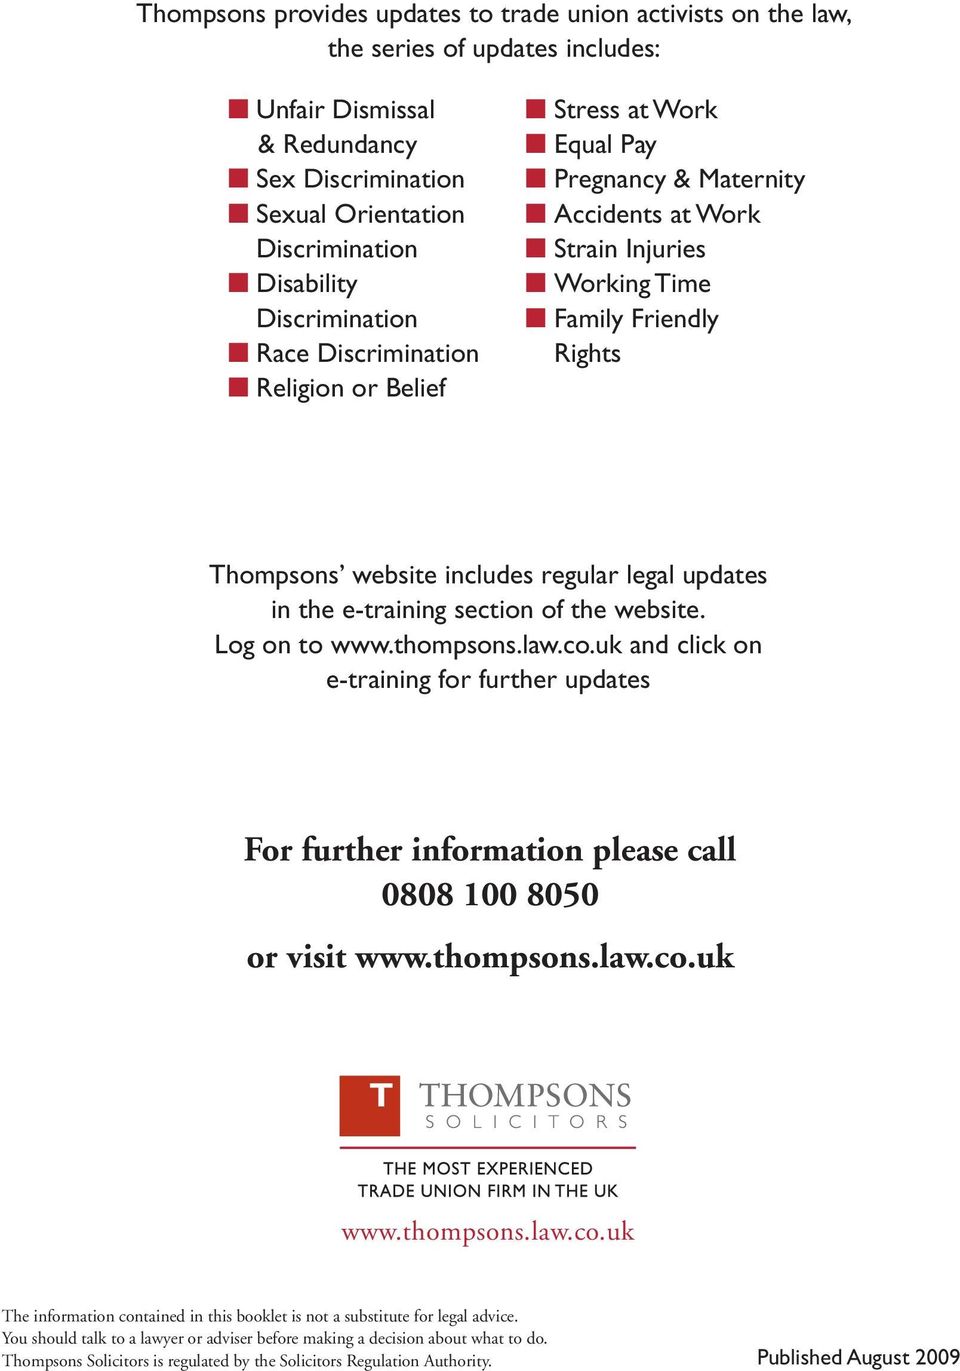 regular legal updates in the e-training section of the website. Log on to www.thompsons.law.co.